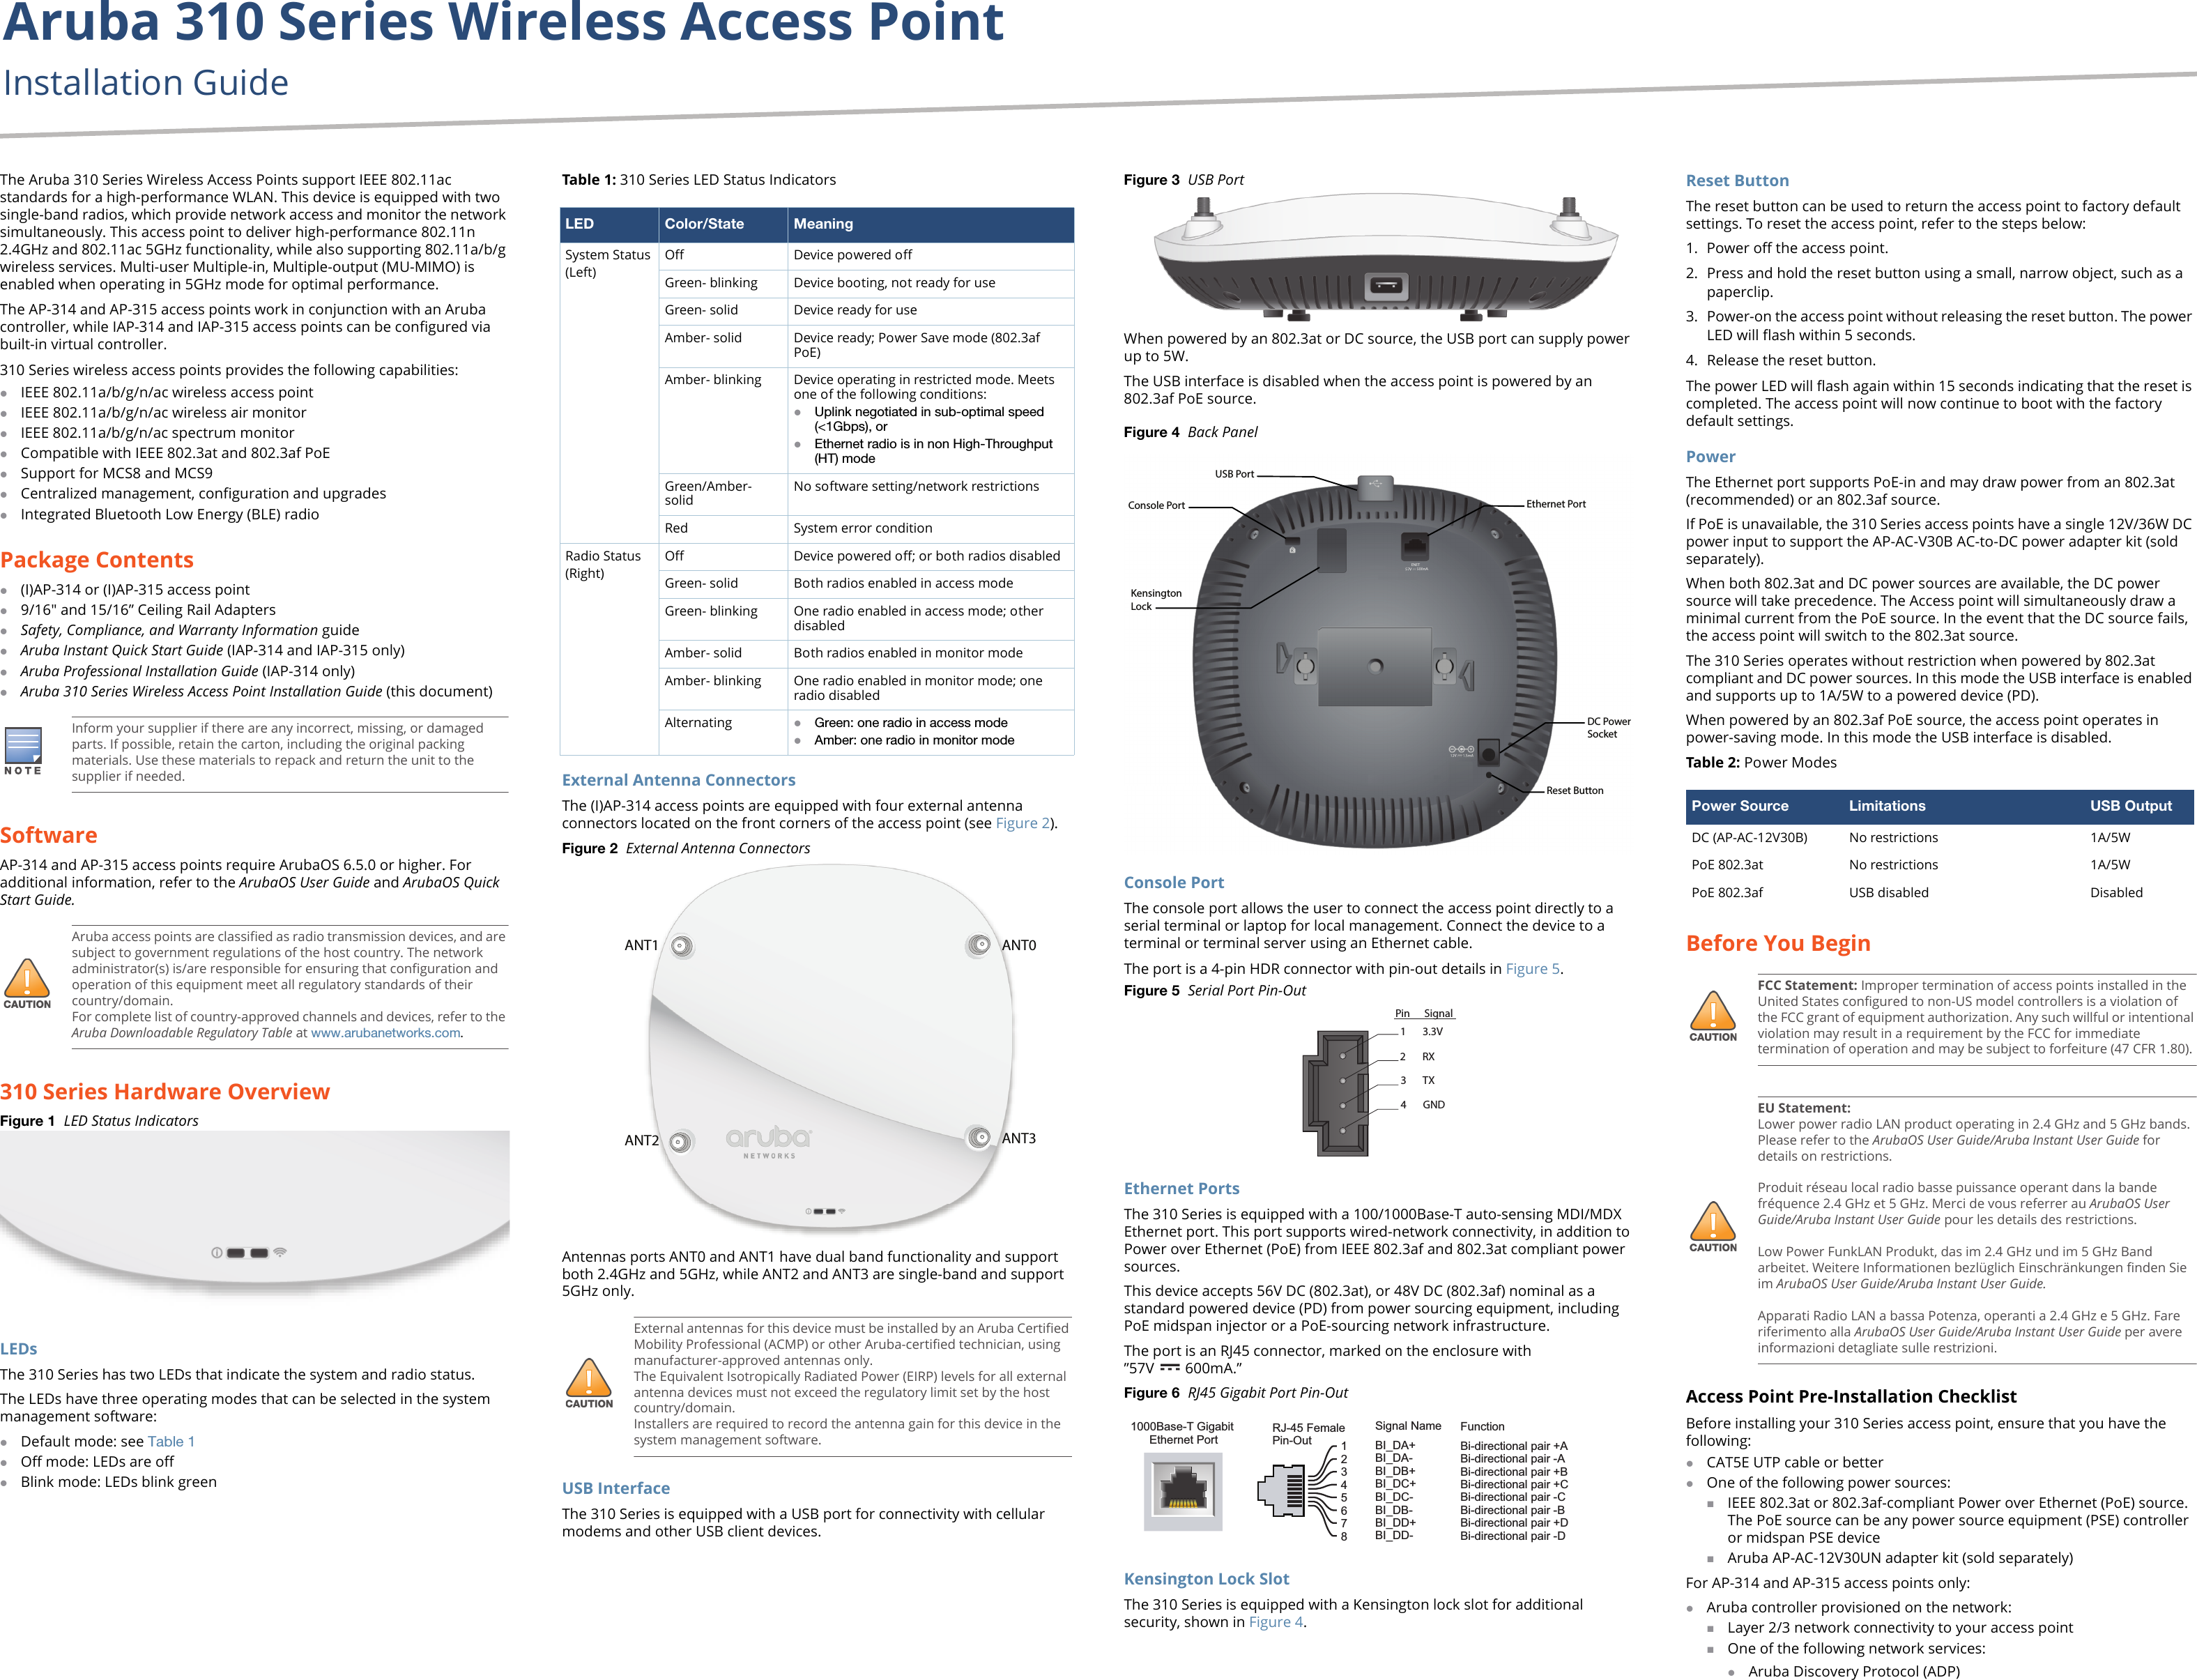 Aruba 310 Series Wireless Access PointInstallation GuideThe Aruba 310 Series Wireless Access Points support IEEE 802.11ac standards for a high-performance WLAN. This device is equipped with two single-band radios, which provide network access and monitor the network simultaneously. This access point to deliver high-performance 802.11n 2.4GHz and 802.11ac 5GHz functionality, while also supporting 802.11a/b/g wireless services. Multi-user Multiple-in, Multiple-output (MU-MIMO) is enabled when operating in 5GHz mode for optimal performance.The AP-314 and AP-315 access points work in conjunction with an Aruba controller, while IAP-314 and IAP-315 access points can be configured via built-in virtual controller.310 Series wireless access points provides the following capabilities:IEEE 802.11a/b/g/n/ac wireless access pointIEEE 802.11a/b/g/n/ac wireless air monitorIEEE 802.11a/b/g/n/ac spectrum monitorCompatible with IEEE 802.3at and 802.3af PoESupport for MCS8 and MCS9Centralized management, configuration and upgradesIntegrated Bluetooth Low Energy (BLE) radioPackage Contents(I)AP-314 or (I)AP-315 access point 9/16&quot; and 15/16” Ceiling Rail AdaptersSafety, Compliance, and Warranty Information guideAruba Instant Quick Start Guide (IAP-314 and IAP-315 only)Aruba Professional Installation Guide (IAP-314 only)Aruba 310 Series Wireless Access Point Installation Guide (this document)SoftwareAP-314 and AP-315 access points require ArubaOS 6.5.0 or higher. For additional information, refer to the ArubaOS User Guide and ArubaOS Quick Start Guide. 310 Series Hardware OverviewFigure 1  LED Status IndicatorsLEDsThe 310 Series has two LEDs that indicate the system and radio status. The LEDs have three operating modes that can be selected in the system management software:Default mode: see Table 1Off mode: LEDs are offBlink mode: LEDs blink green Table 1: 310 Series LED Status IndicatorsExternal Antenna ConnectorsThe (I)AP-314 access points are equipped with four external antenna connectors located on the front corners of the access point (see Figure 2).Figure 2  External Antenna Connectors Antennas ports ANT0 and ANT1 have dual band functionality and support both 2.4GHz and 5GHz, while ANT2 and ANT3 are single-band and support 5GHz only.USB InterfaceThe 310 Series is equipped with a USB port for connectivity with cellular modems and other USB client devices. Figure 3  USB PortWhen powered by an 802.3at or DC source, the USB port can supply power up to 5W.The USB interface is disabled when the access point is powered by an 802.3af PoE source.Figure 4  Back Panel Console PortThe console port allows the user to connect the access point directly to a serial terminal or laptop for local management. Connect the device to a terminal or terminal server using an Ethernet cable.The port is a 4-pin HDR connector with pin-out details in Figure 5.Figure 5  Serial Port Pin-OutEthernet PortsThe 310 Series is equipped with a 100/1000Base-T auto-sensing MDI/MDX Ethernet port. This port supports wired-network connectivity, in addition to Power over Ethernet (PoE) from IEEE 802.3af and 802.3at compliant power sources. This device accepts 56V DC (802.3at), or 48V DC (802.3af) nominal as a standard powered device (PD) from power sourcing equipment, including PoE midspan injector or a PoE-sourcing network infrastructure.The port is an RJ45 connector, marked on the enclosure with ”57V 600mA.”Figure 6  RJ45 Gigabit Port Pin-OutKensington Lock SlotThe 310 Series is equipped with a Kensington lock slot for additional security, shown in Figure 4. Reset ButtonThe reset button can be used to return the access point to factory default settings. To reset the access point, refer to the steps below:1. Power off the access point.2. Press and hold the reset button using a small, narrow object, such as a paperclip.3. Power-on the access point without releasing the reset button. The power LED will flash within 5 seconds.4. Release the reset button.The power LED will flash again within 15 seconds indicating that the reset is completed. The access point will now continue to boot with the factory default settings.PowerThe Ethernet port supports PoE-in and may draw power from an 802.3at (recommended) or an 802.3af source. If PoE is unavailable, the 310 Series access points have a single 12V/36W DC power input to support the AP-AC-V30B AC-to-DC power adapter kit (sold separately).When both 802.3at and DC power sources are available, the DC power source will take precedence. The Access point will simultaneously draw a minimal current from the PoE source. In the event that the DC source fails, the access point will switch to the 802.3at source.The 310 Series operates without restriction when powered by 802.3at compliant and DC power sources. In this mode the USB interface is enabled and supports up to 1A/5W to a powered device (PD). When powered by an 802.3af PoE source, the access point operates in power-saving mode. In this mode the USB interface is disabled.Table 2: Power ModesBefore You BeginAccess Point Pre-Installation ChecklistBefore installing your 310 Series access point, ensure that you have the following:CAT5E UTP cable or betterOne of the following power sources:IEEE 802.3at or 802.3af-compliant Power over Ethernet (PoE) source. The PoE source can be any power source equipment (PSE) controller or midspan PSE deviceAruba AP-AC-12V30UN adapter kit (sold separately)For AP-314 and AP-315 access points only:Aruba controller provisioned on the network:Layer 2/3 network connectivity to your access pointOne of the following network services:Aruba Discovery Protocol (ADP)Inform your supplier if there are any incorrect, missing, or damaged parts. If possible, retain the carton, including the original packing materials. Use these materials to repack and return the unit to the supplier if needed.Aruba access points are classified as radio transmission devices, and are subject to government regulations of the host country. The network administrator(s) is/are responsible for ensuring that configuration and operation of this equipment meet all regulatory standards of their country/domain. For complete list of country-approved channels and devices, refer to the Aruba Downloadable Regulatory Table at www.arubanetworks.com.LED Color/State MeaningSystem Status(Left)Off Device powered offGreen- blinking Device booting, not ready for useGreen- solid Device ready for useAmber- solid Device ready; Power Save mode (802.3af PoE)Amber- blinking Device operating in restricted mode. Meets one of the following conditions:Uplink negotiated in sub-optimal speed (&lt;1Gbps), orEthernet radio is in non High-Throughput (HT) modeGreen/Amber- solid No software setting/network restrictionsRed System error conditionRadio Status(Right)Off Device powered off; or both radios disabledGreen- solid Both radios enabled in access modeGreen- blinking One radio enabled in access mode; other disabledAmber- solid Both radios enabled in monitor modeAmber- blinking One radio enabled in monitor mode; one radio disabledAlternating Green: one radio in access modeAmber: one radio in monitor modeExternal antennas for this device must be installed by an Aruba Certified Mobility Professional (ACMP) or other Aruba-certified technician, using manufacturer-approved antennas only. The Equivalent Isotropically Radiated Power (EIRP) levels for all external antenna devices must not exceed the regulatory limit set by the host country/domain. Installers are required to record the antenna gain for this device in the system management software.ANT1 ANT0ANT2 ANT3USB PortEthernet PortConsole PortKensington LockDC Power SocketReset Button1       3.3V2       RX3       TX4       GNDPin      Signal1000Base-T Gigabit Ethernet PortRJ-45 FemalePin-OutSignal Name12345678BI_DC+BI_DC-BI_DD+BI_DD-BI_DA+BI_DA-BI_DB+BI_DB-FunctionBi-directional pair +CBi-directional pair -CBi-directional pair +DBi-directional pair -DBi-directional pair +ABi-directional pair -ABi-directional pair +BBi-directional pair -B     Power Source Limitations USB OutputDC (AP-AC-12V30B) No restrictions 1A/5WPoE 802.3at No restrictions 1A/5WPoE 802.3af USB disabled DisabledFCC Statement: Improper termination of access points installed in the United States configured to non-US model controllers is a violation of the FCC grant of equipment authorization. Any such willful or intentional violation may result in a requirement by the FCC for immediate termination of operation and may be subject to forfeiture (47 CFR 1.80).EU Statement: Lower power radio LAN product operating in 2.4 GHz and 5 GHz bands. Please refer to the ArubaOS User Guide/Aruba Instant User Guide for details on restrictions.Produit réseau local radio basse puissance operant dans la bande fréquence 2.4 GHz et 5 GHz. Merci de vous referrer au ArubaOS User Guide/Aruba Instant User Guide pour les details des restrictions.Low Power FunkLAN Produkt, das im 2.4 GHz und im 5 GHz Band arbeitet. Weitere Informationen bezlüglich Einschränkungen finden Sie im ArubaOS User Guide/Aruba Instant User Guide.Apparati Radio LAN a bassa Potenza, operanti a 2.4 GHz e 5 GHz. Fare riferimento alla ArubaOS User Guide/Aruba Instant User Guide per avere informazioni detagliate sulle restrizioni.